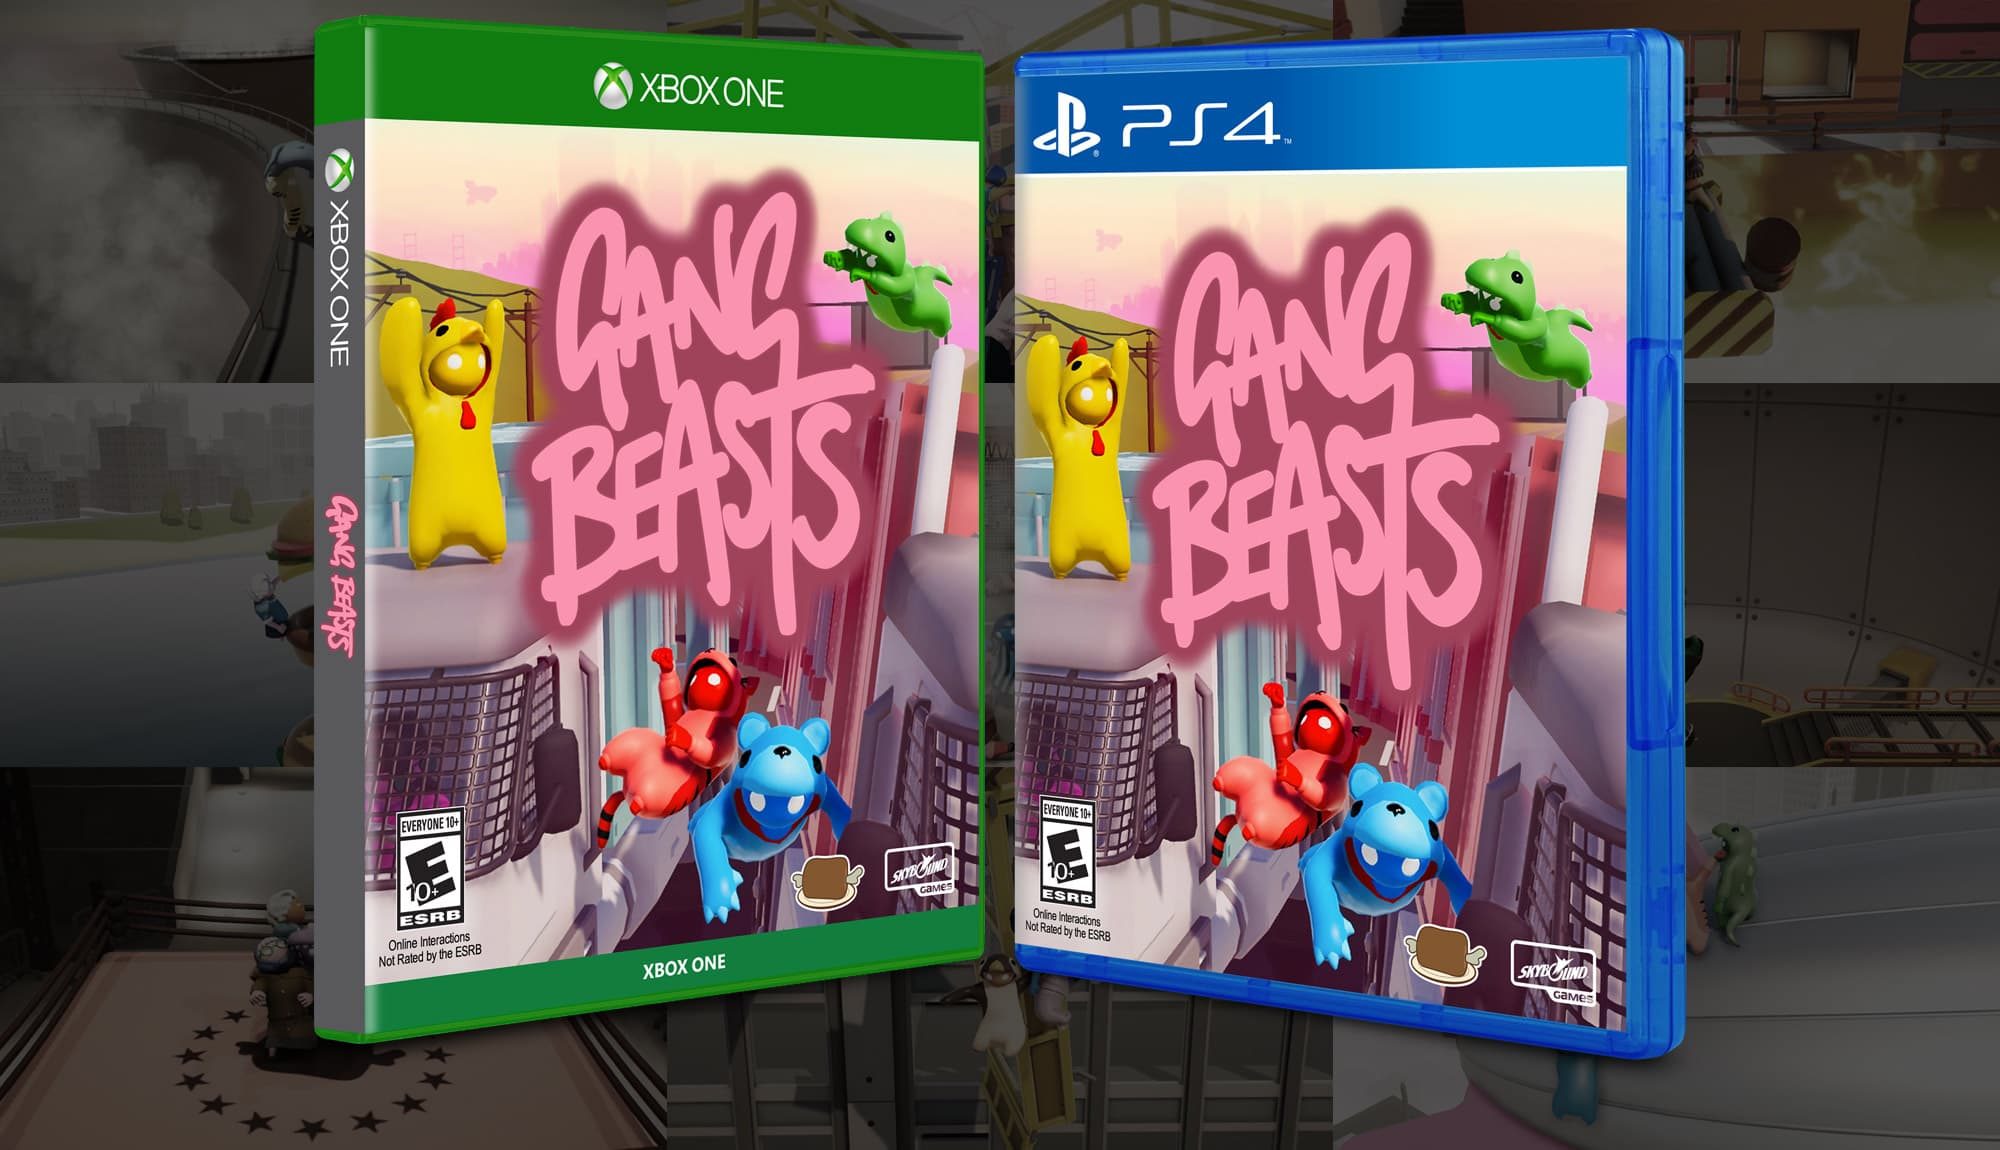 Gang Beasts Hitting Consoles This December! - Skybound Entertainment